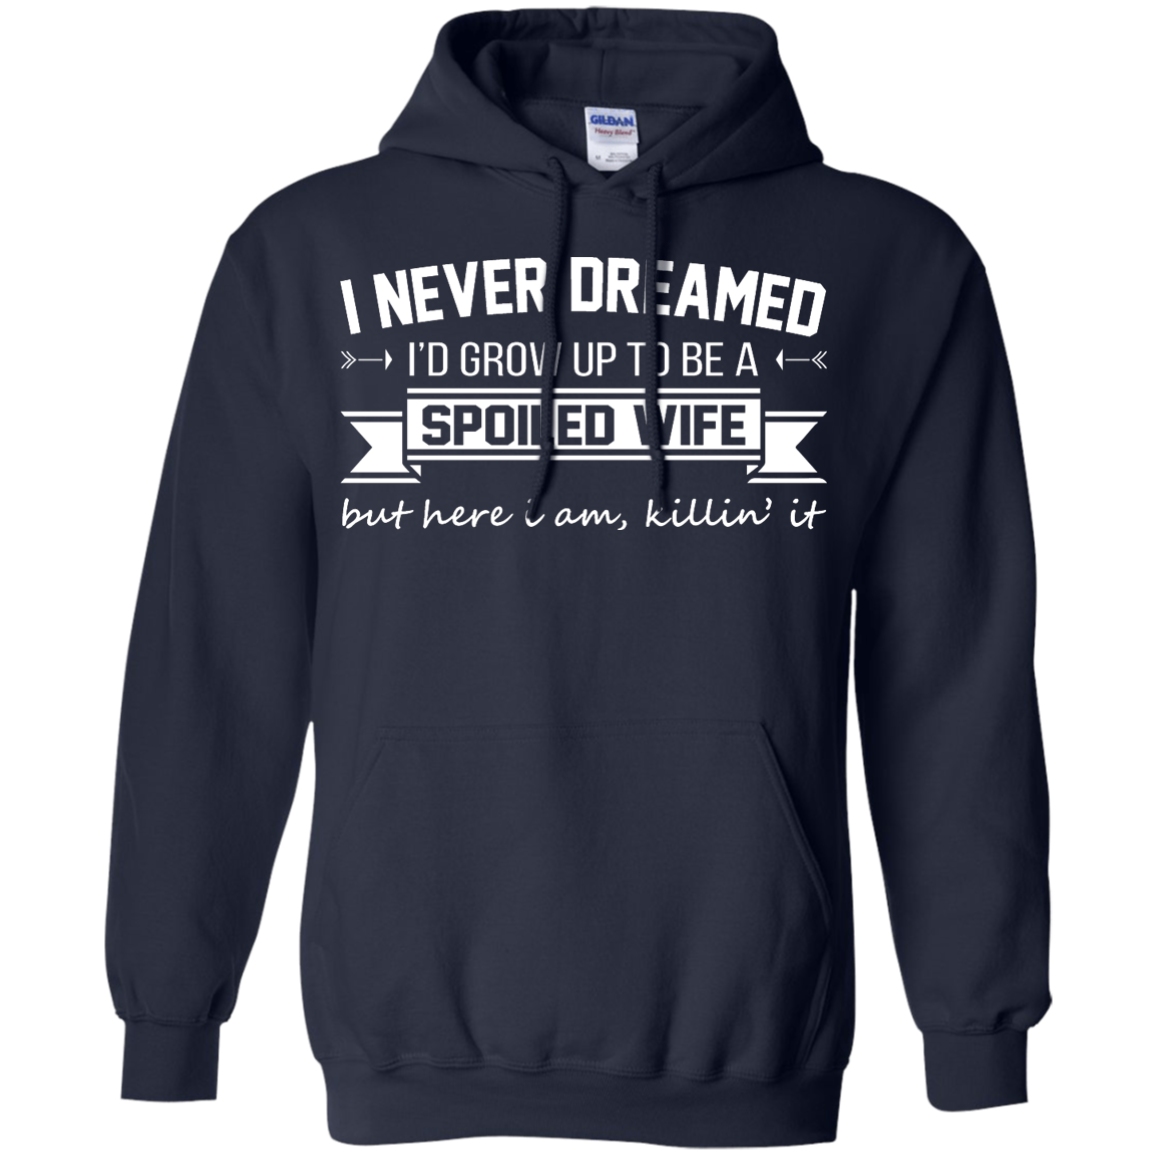 I Never Dreamed I'd Grow Up To Be A Spoiled Wife Shirt, Hoodie, Tank ...